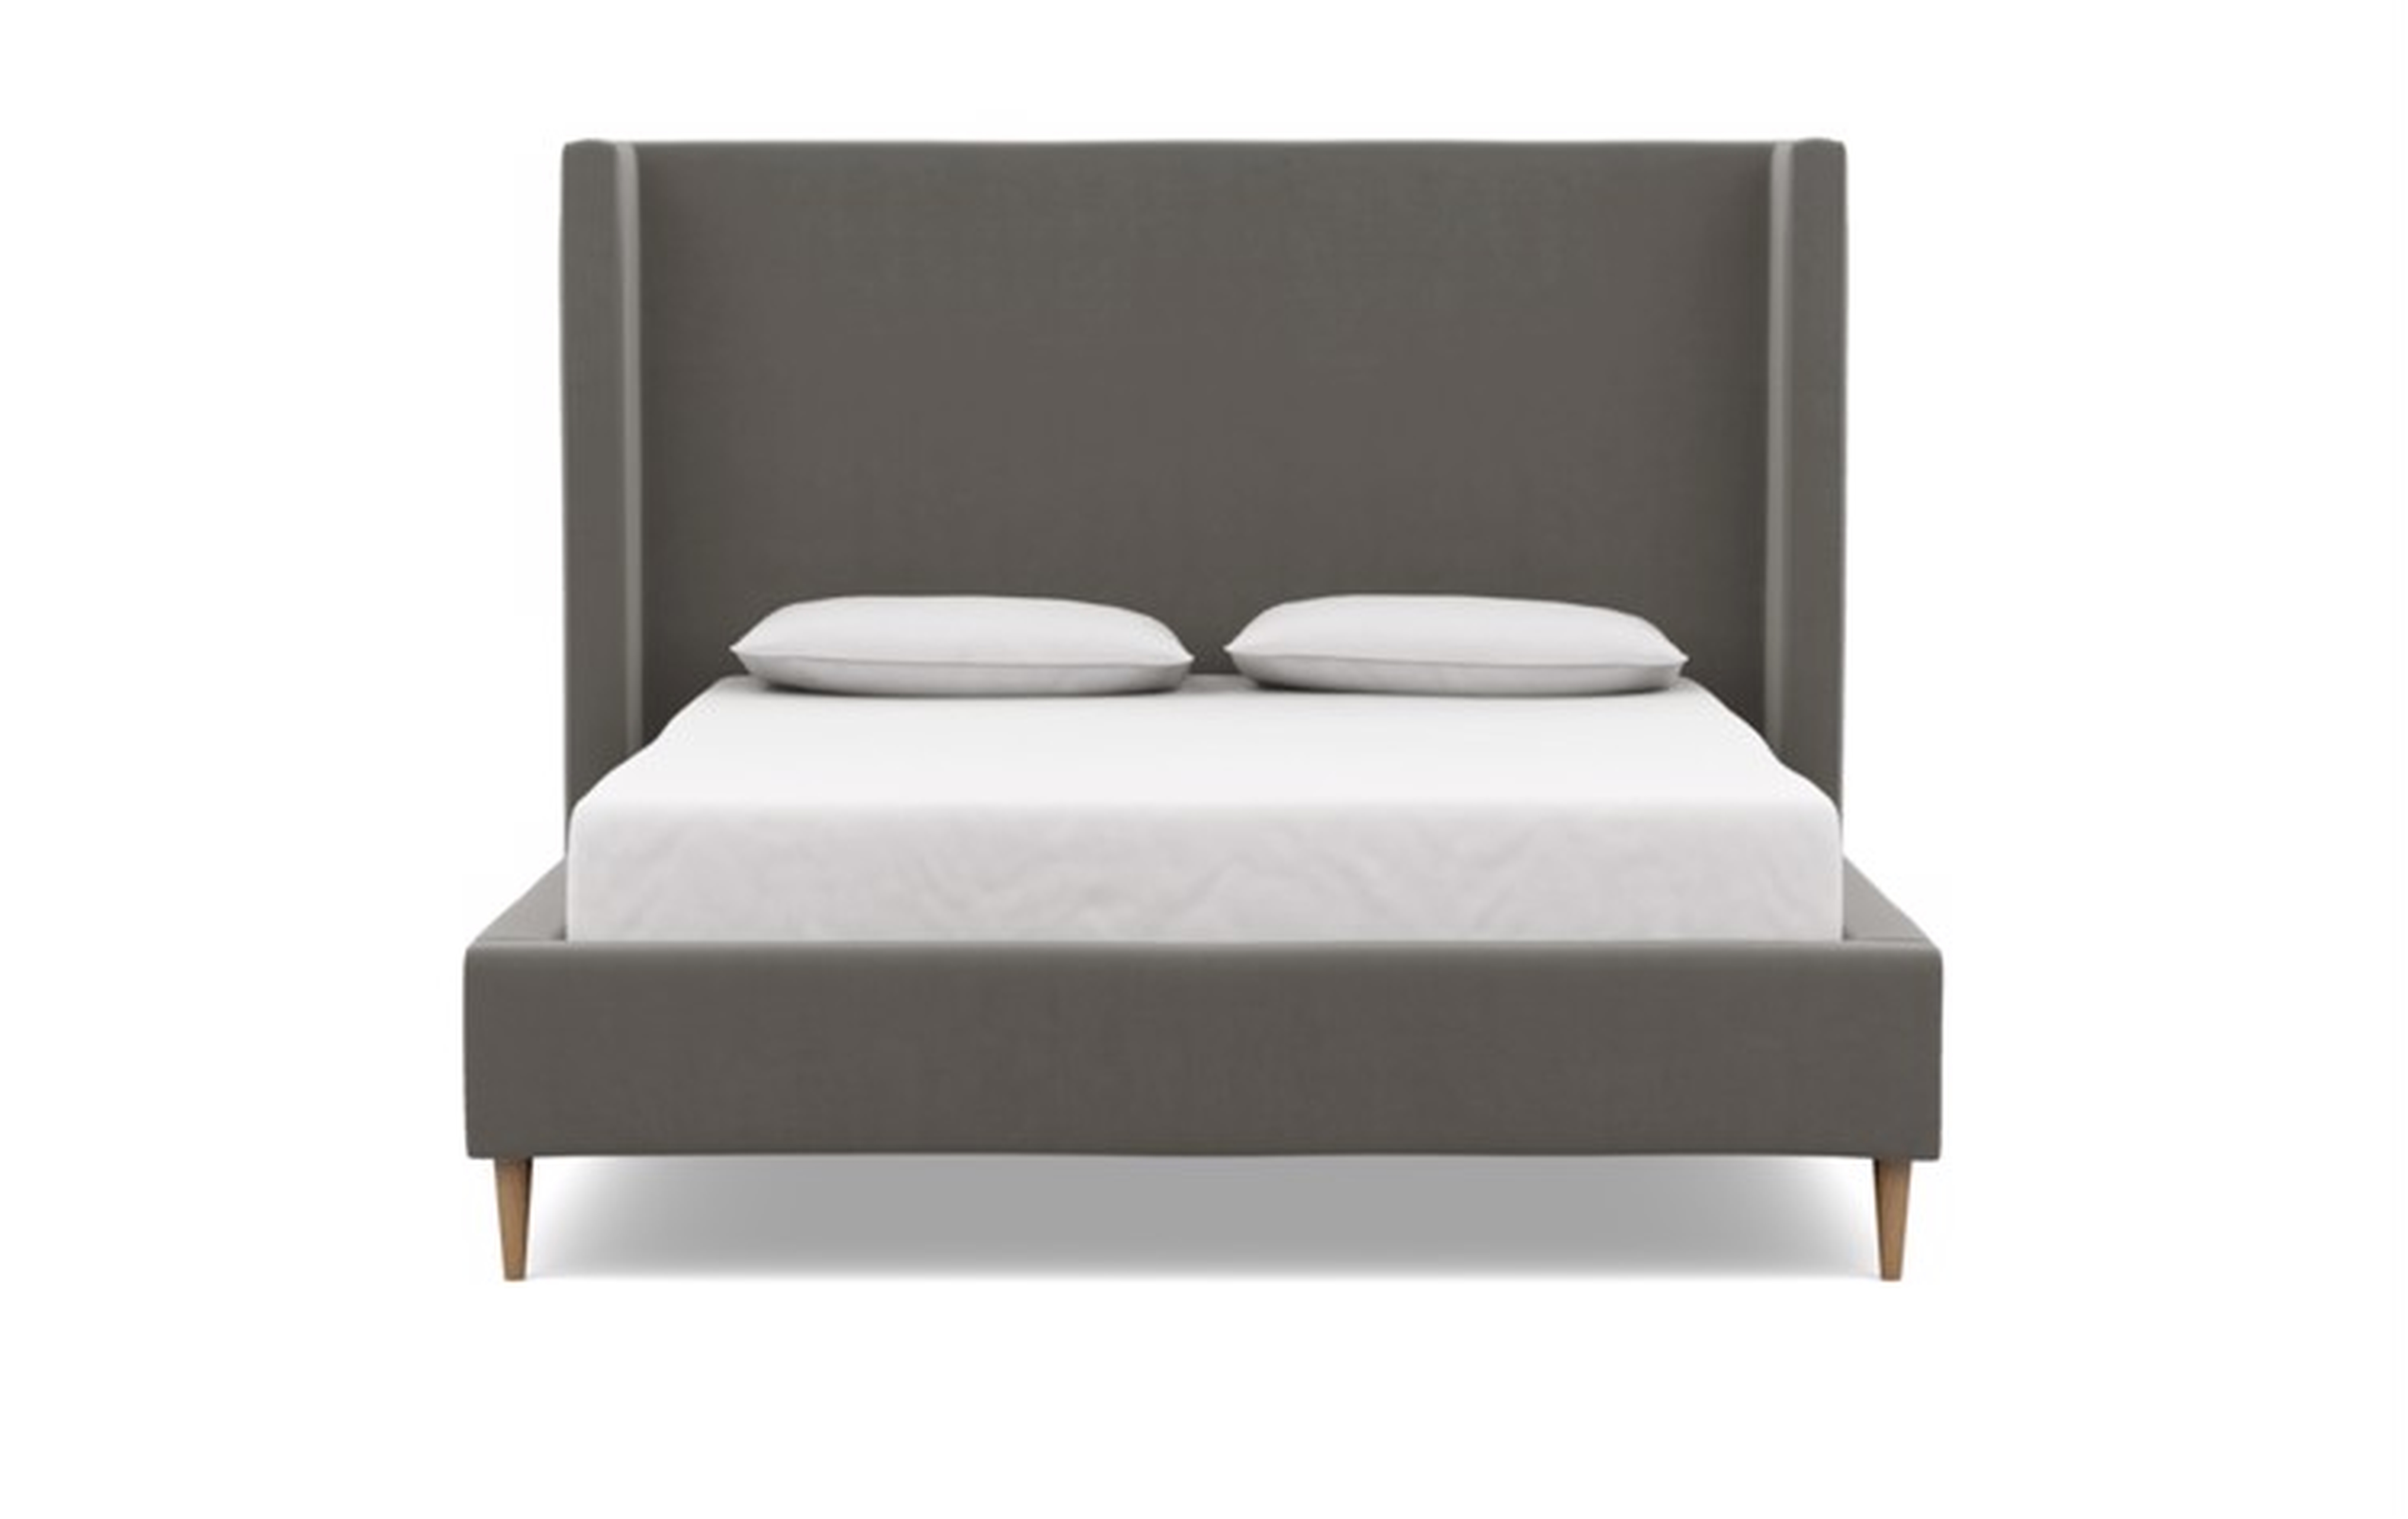 Custon: Oliver Beds in Greige Mod Velvet Fabric with tall headboard with Natural Oak Tapered Round Wood -54"H - Interior Define